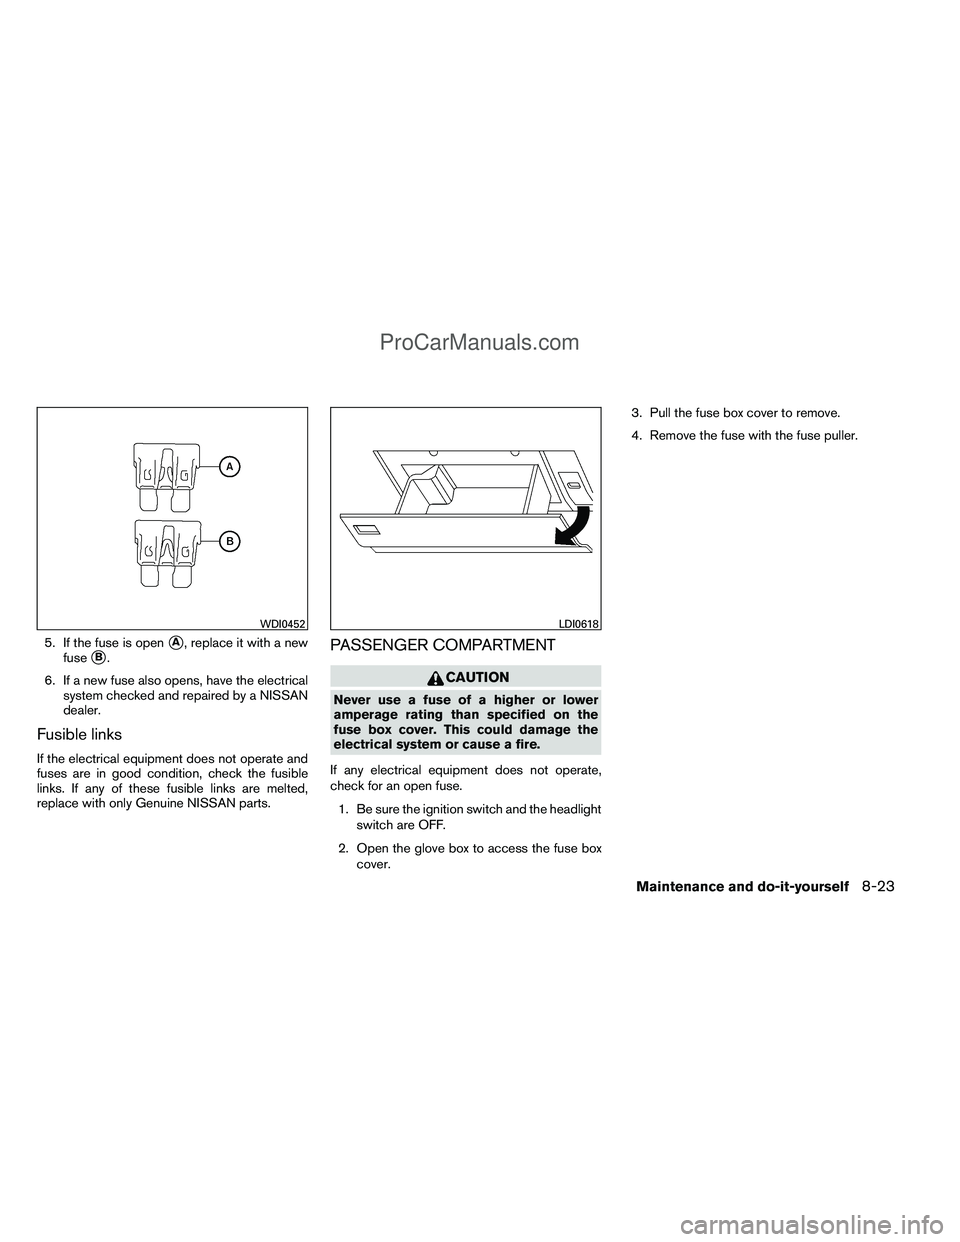 NISSAN TITAN 2012  Owners Manual 5. If the fuse is openA, replace it with a new
fuse
B.
6. If a new fuse also opens, have the electrical system checked and repaired by a NISSAN
dealer.
Fusible links
If the electrical equipment does